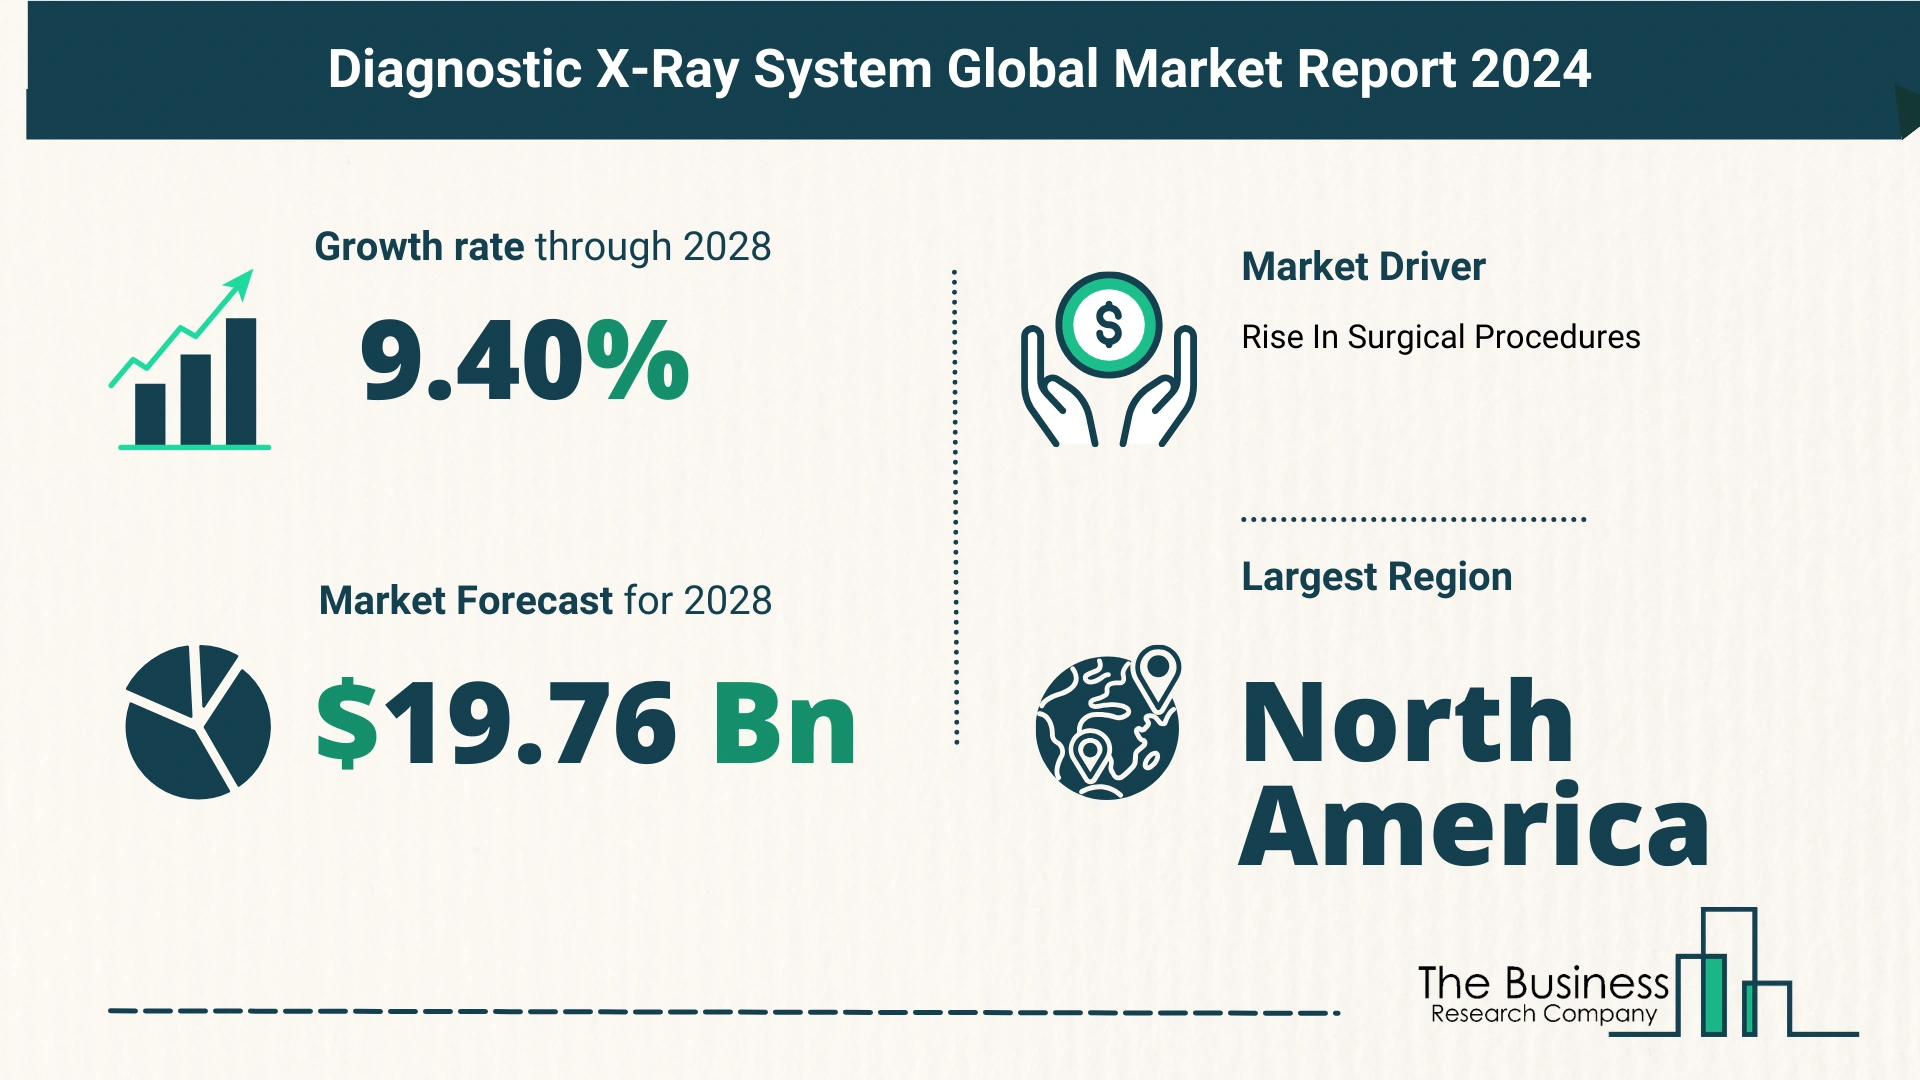 What Is The Forecast Growth Rate For The Diagnostic X-Ray System Market?